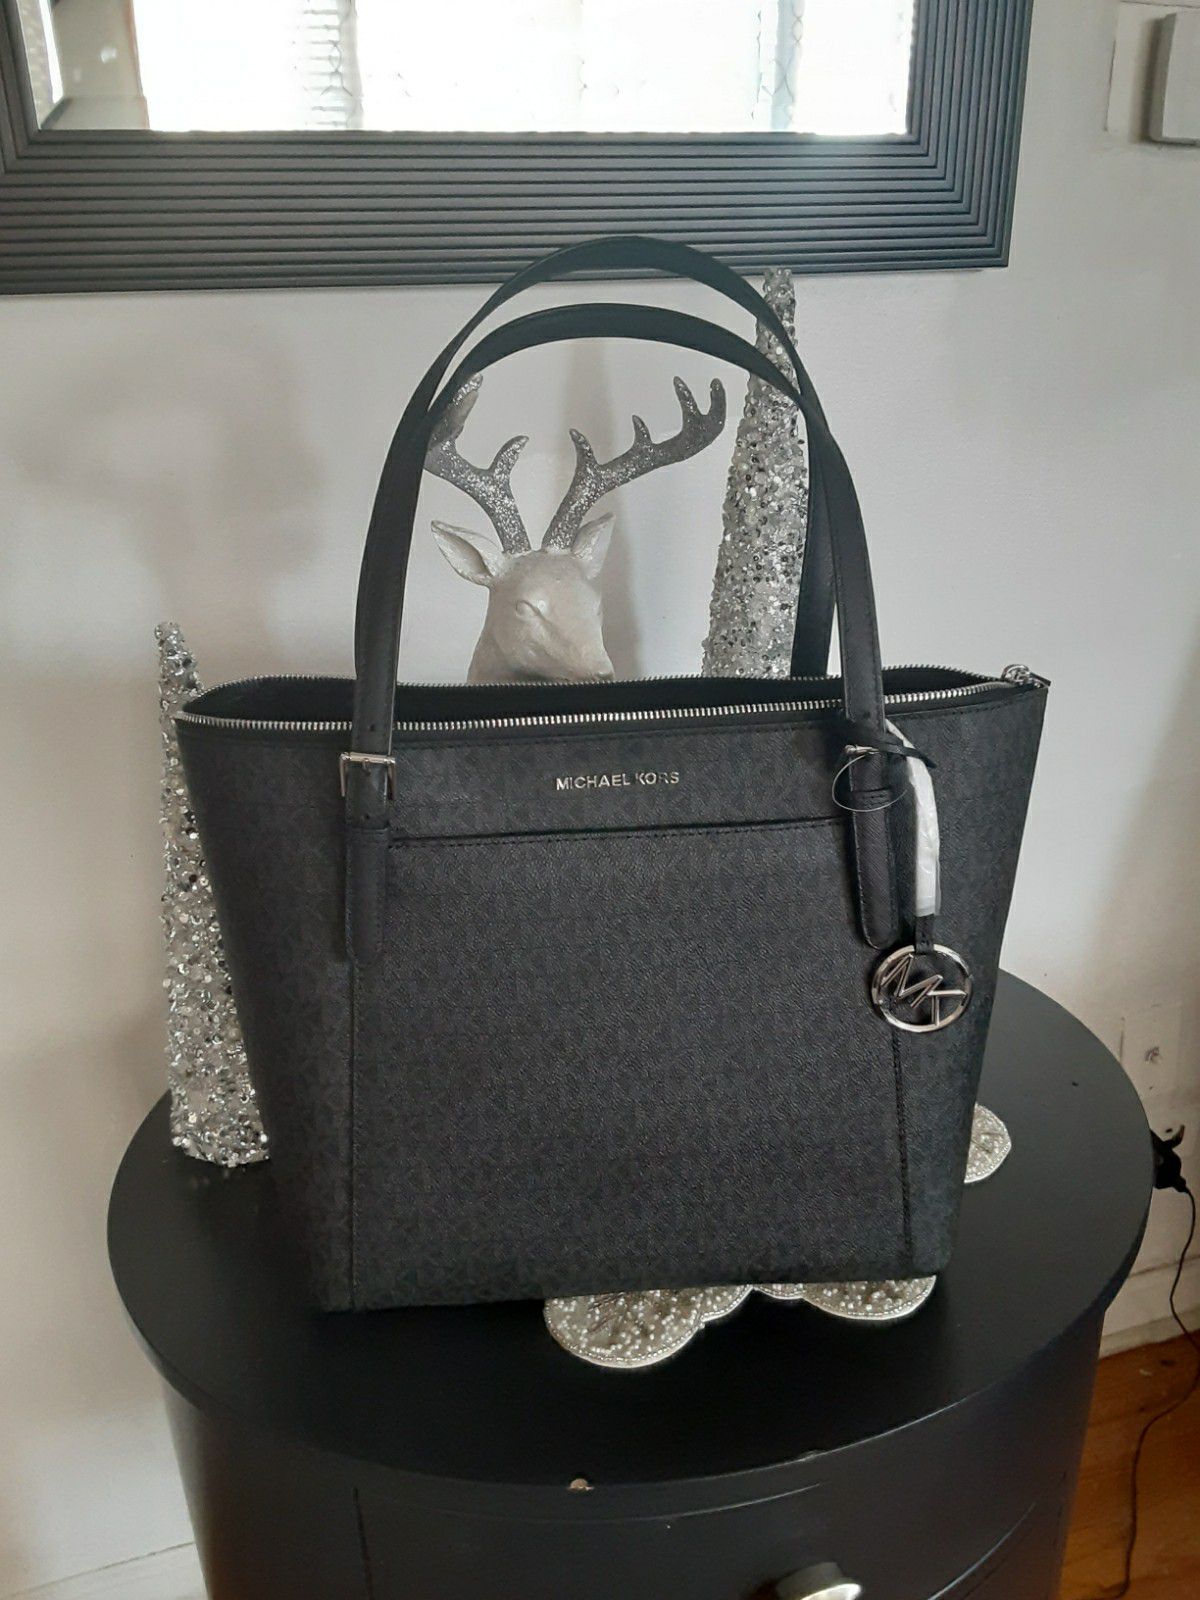 Michael kors purse new never used $150 firm